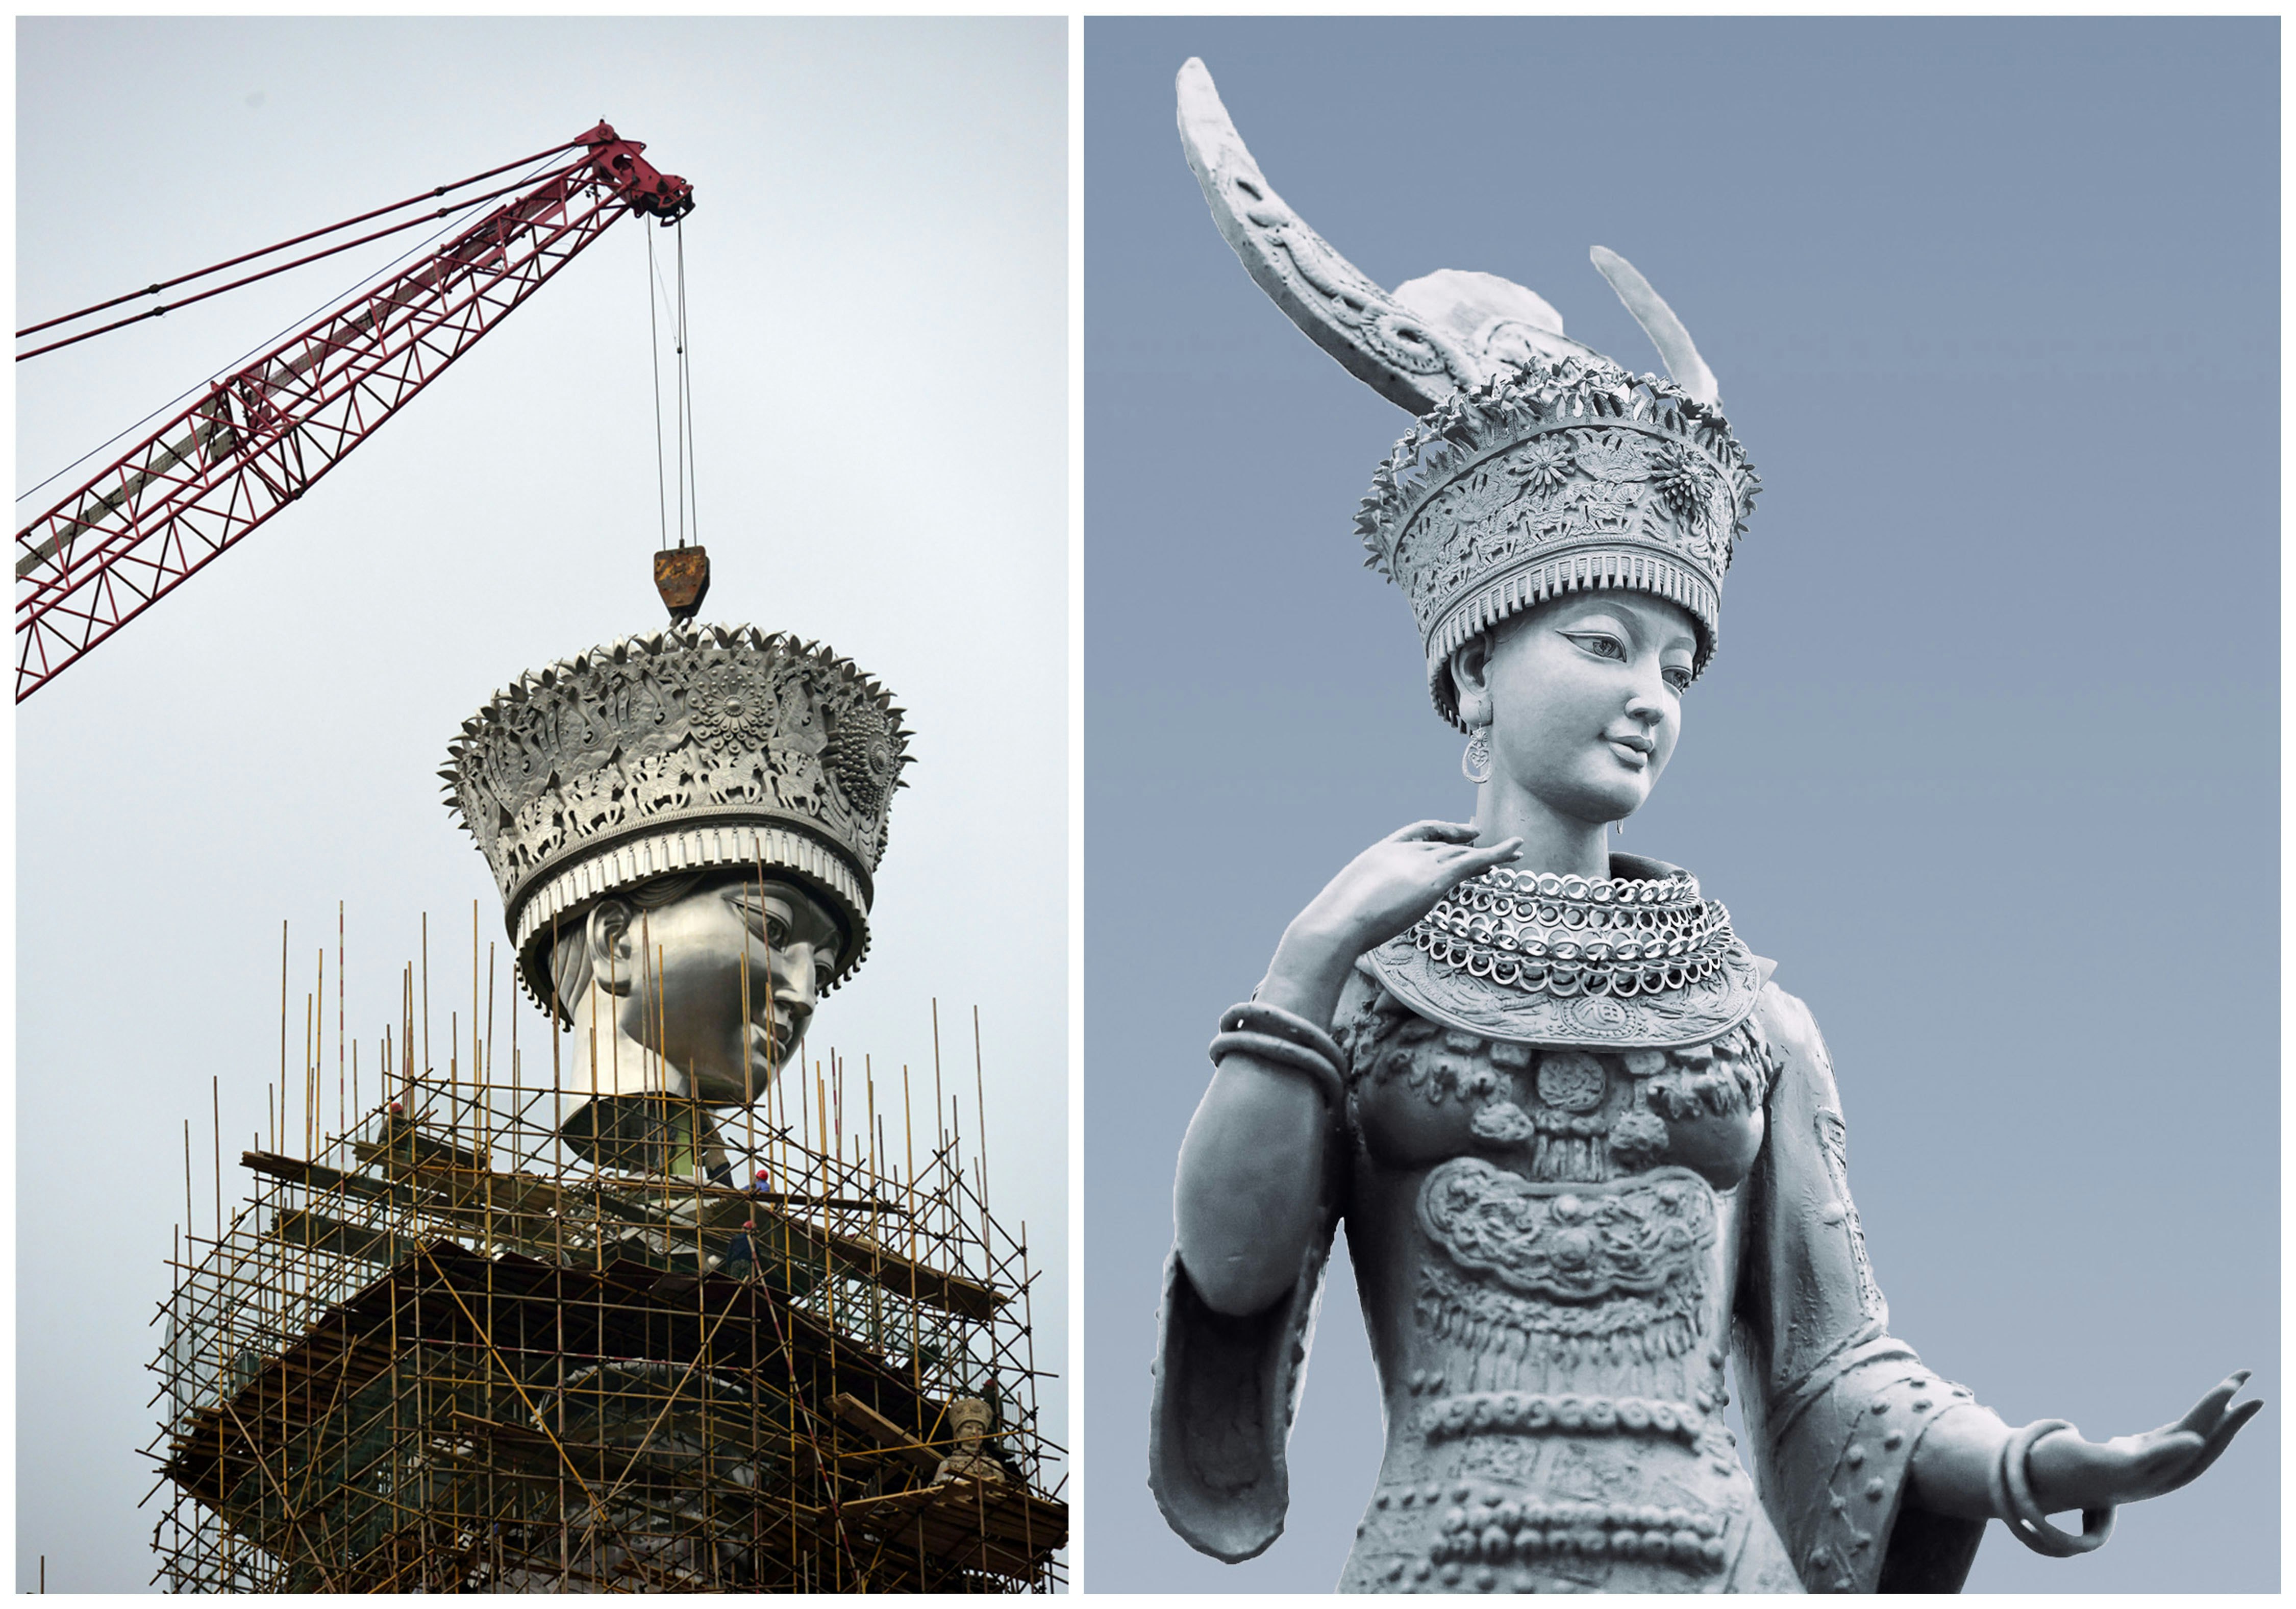 The construction site as it is today and on the right, an artist's rendering of the completed statue.